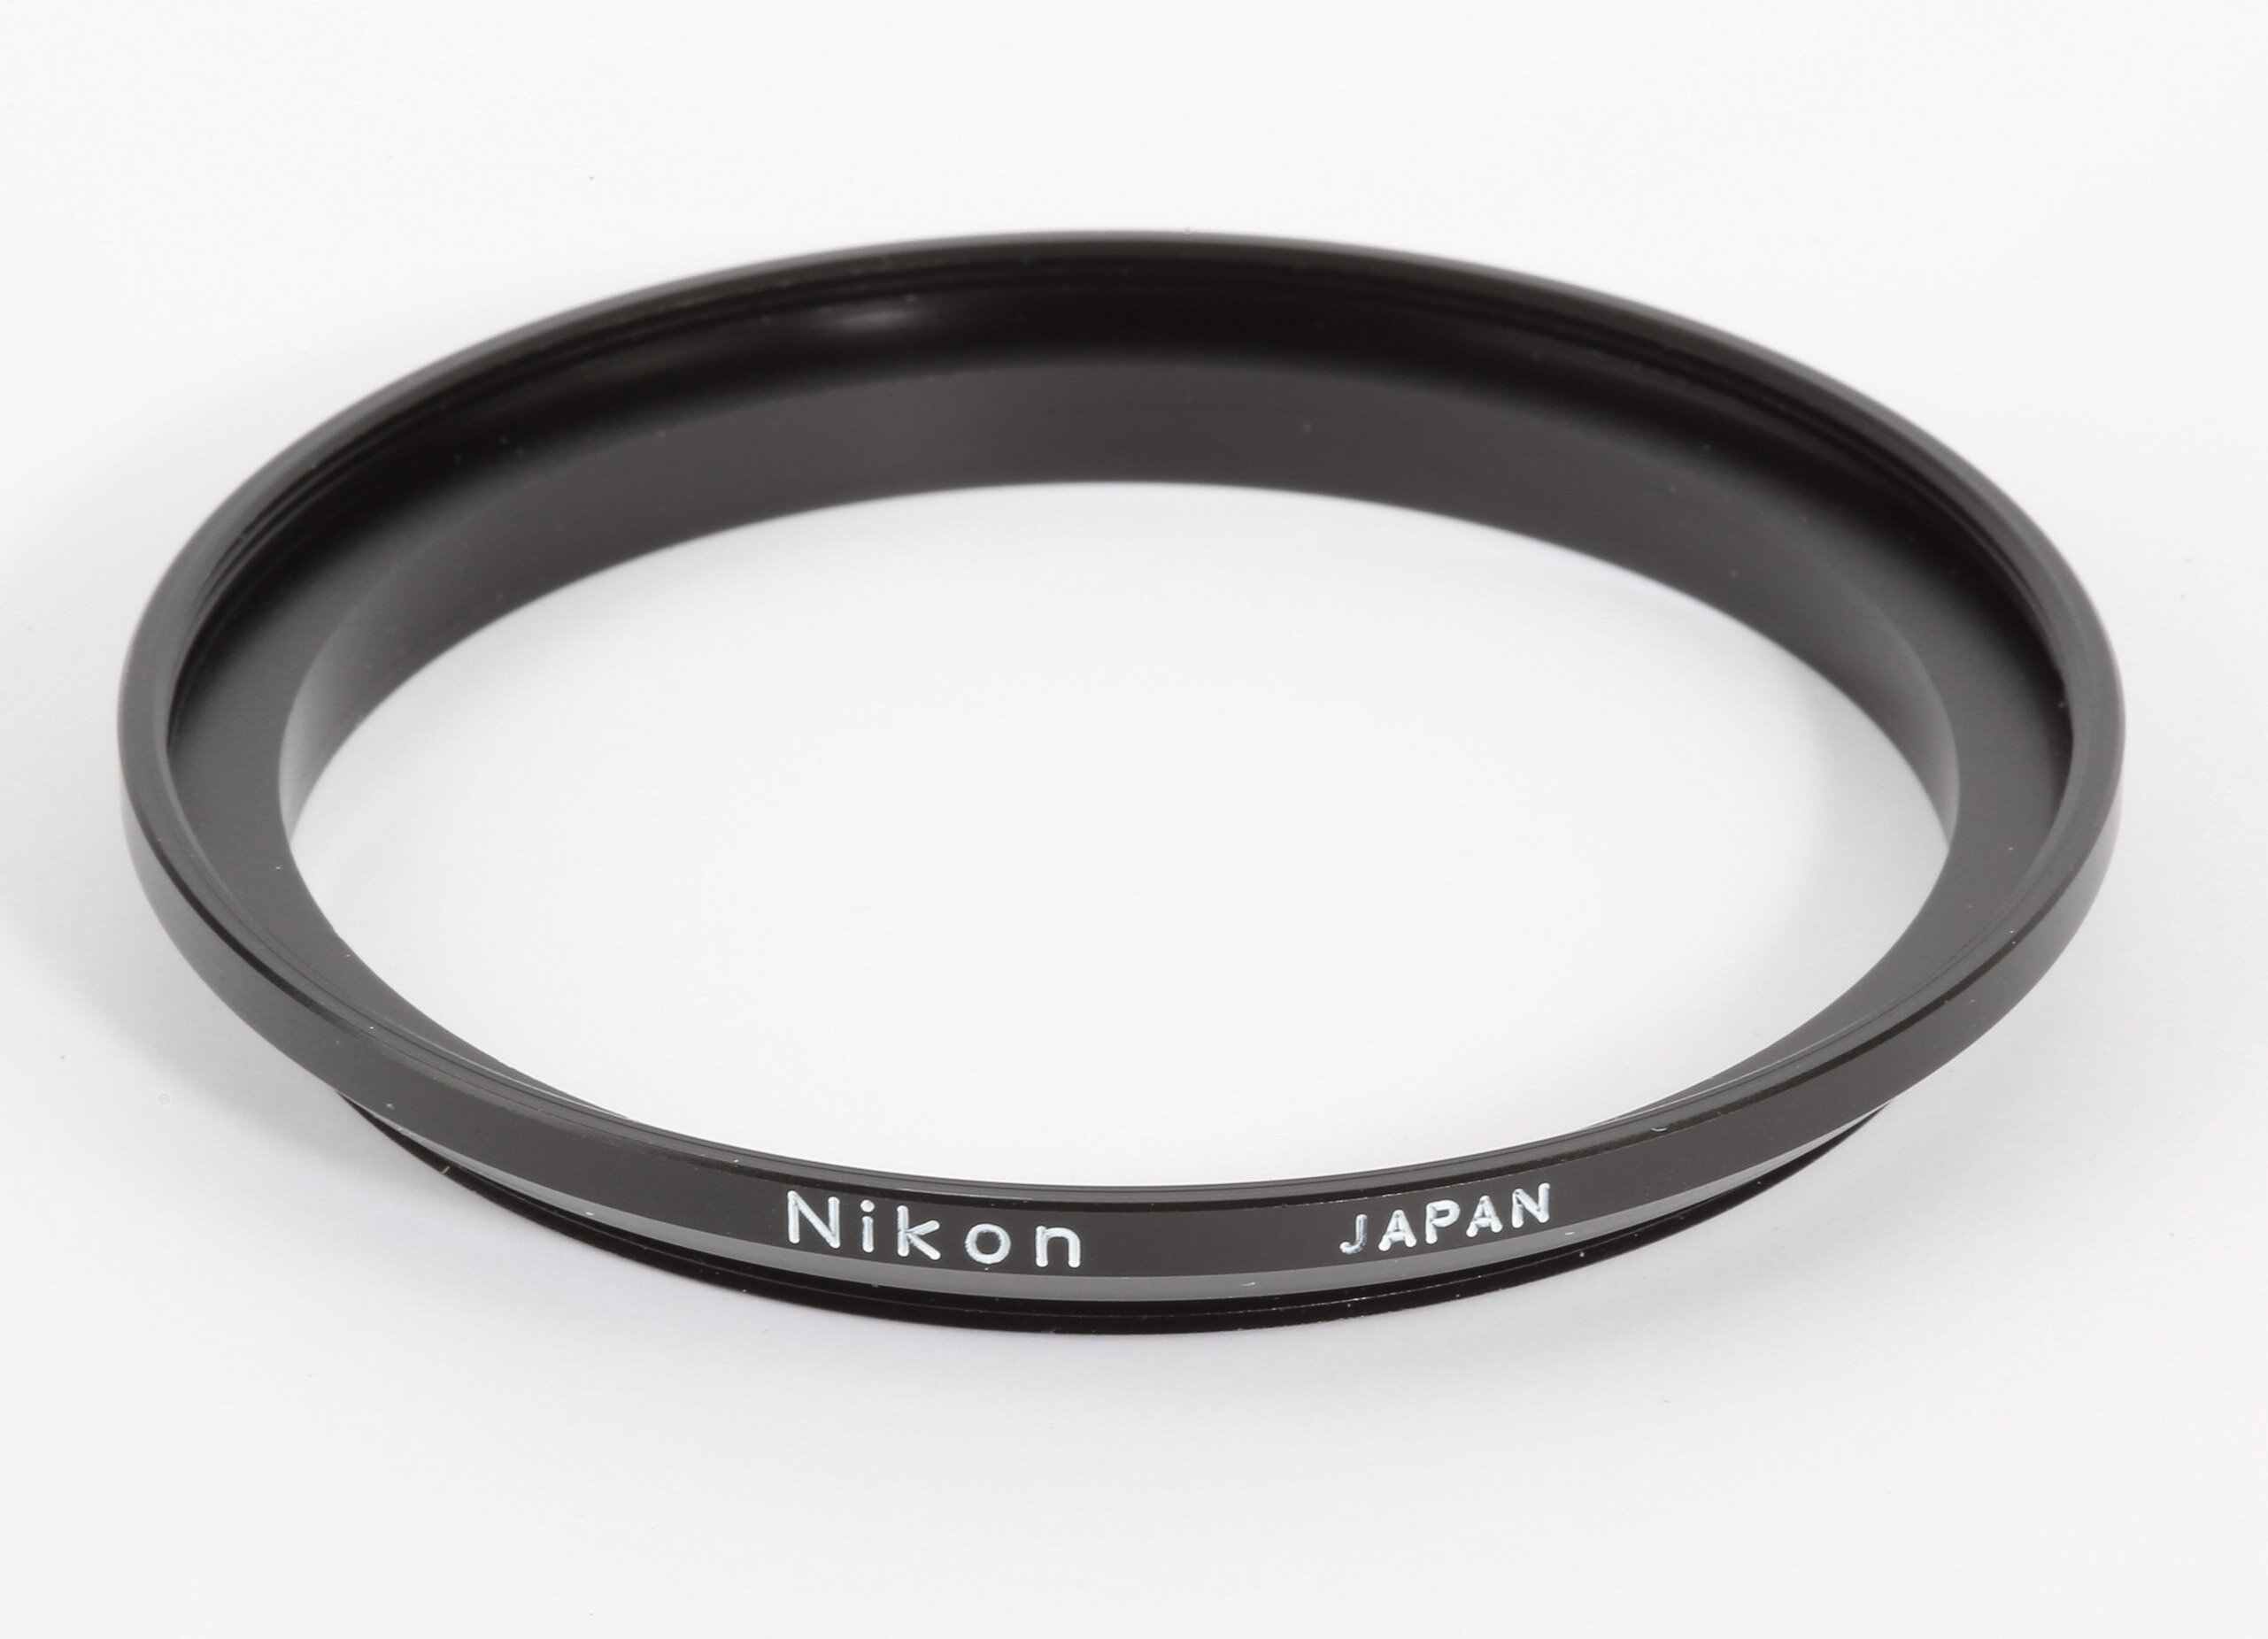 Nikon Adaptor for Filter 72mm to Lens 62mm Filters